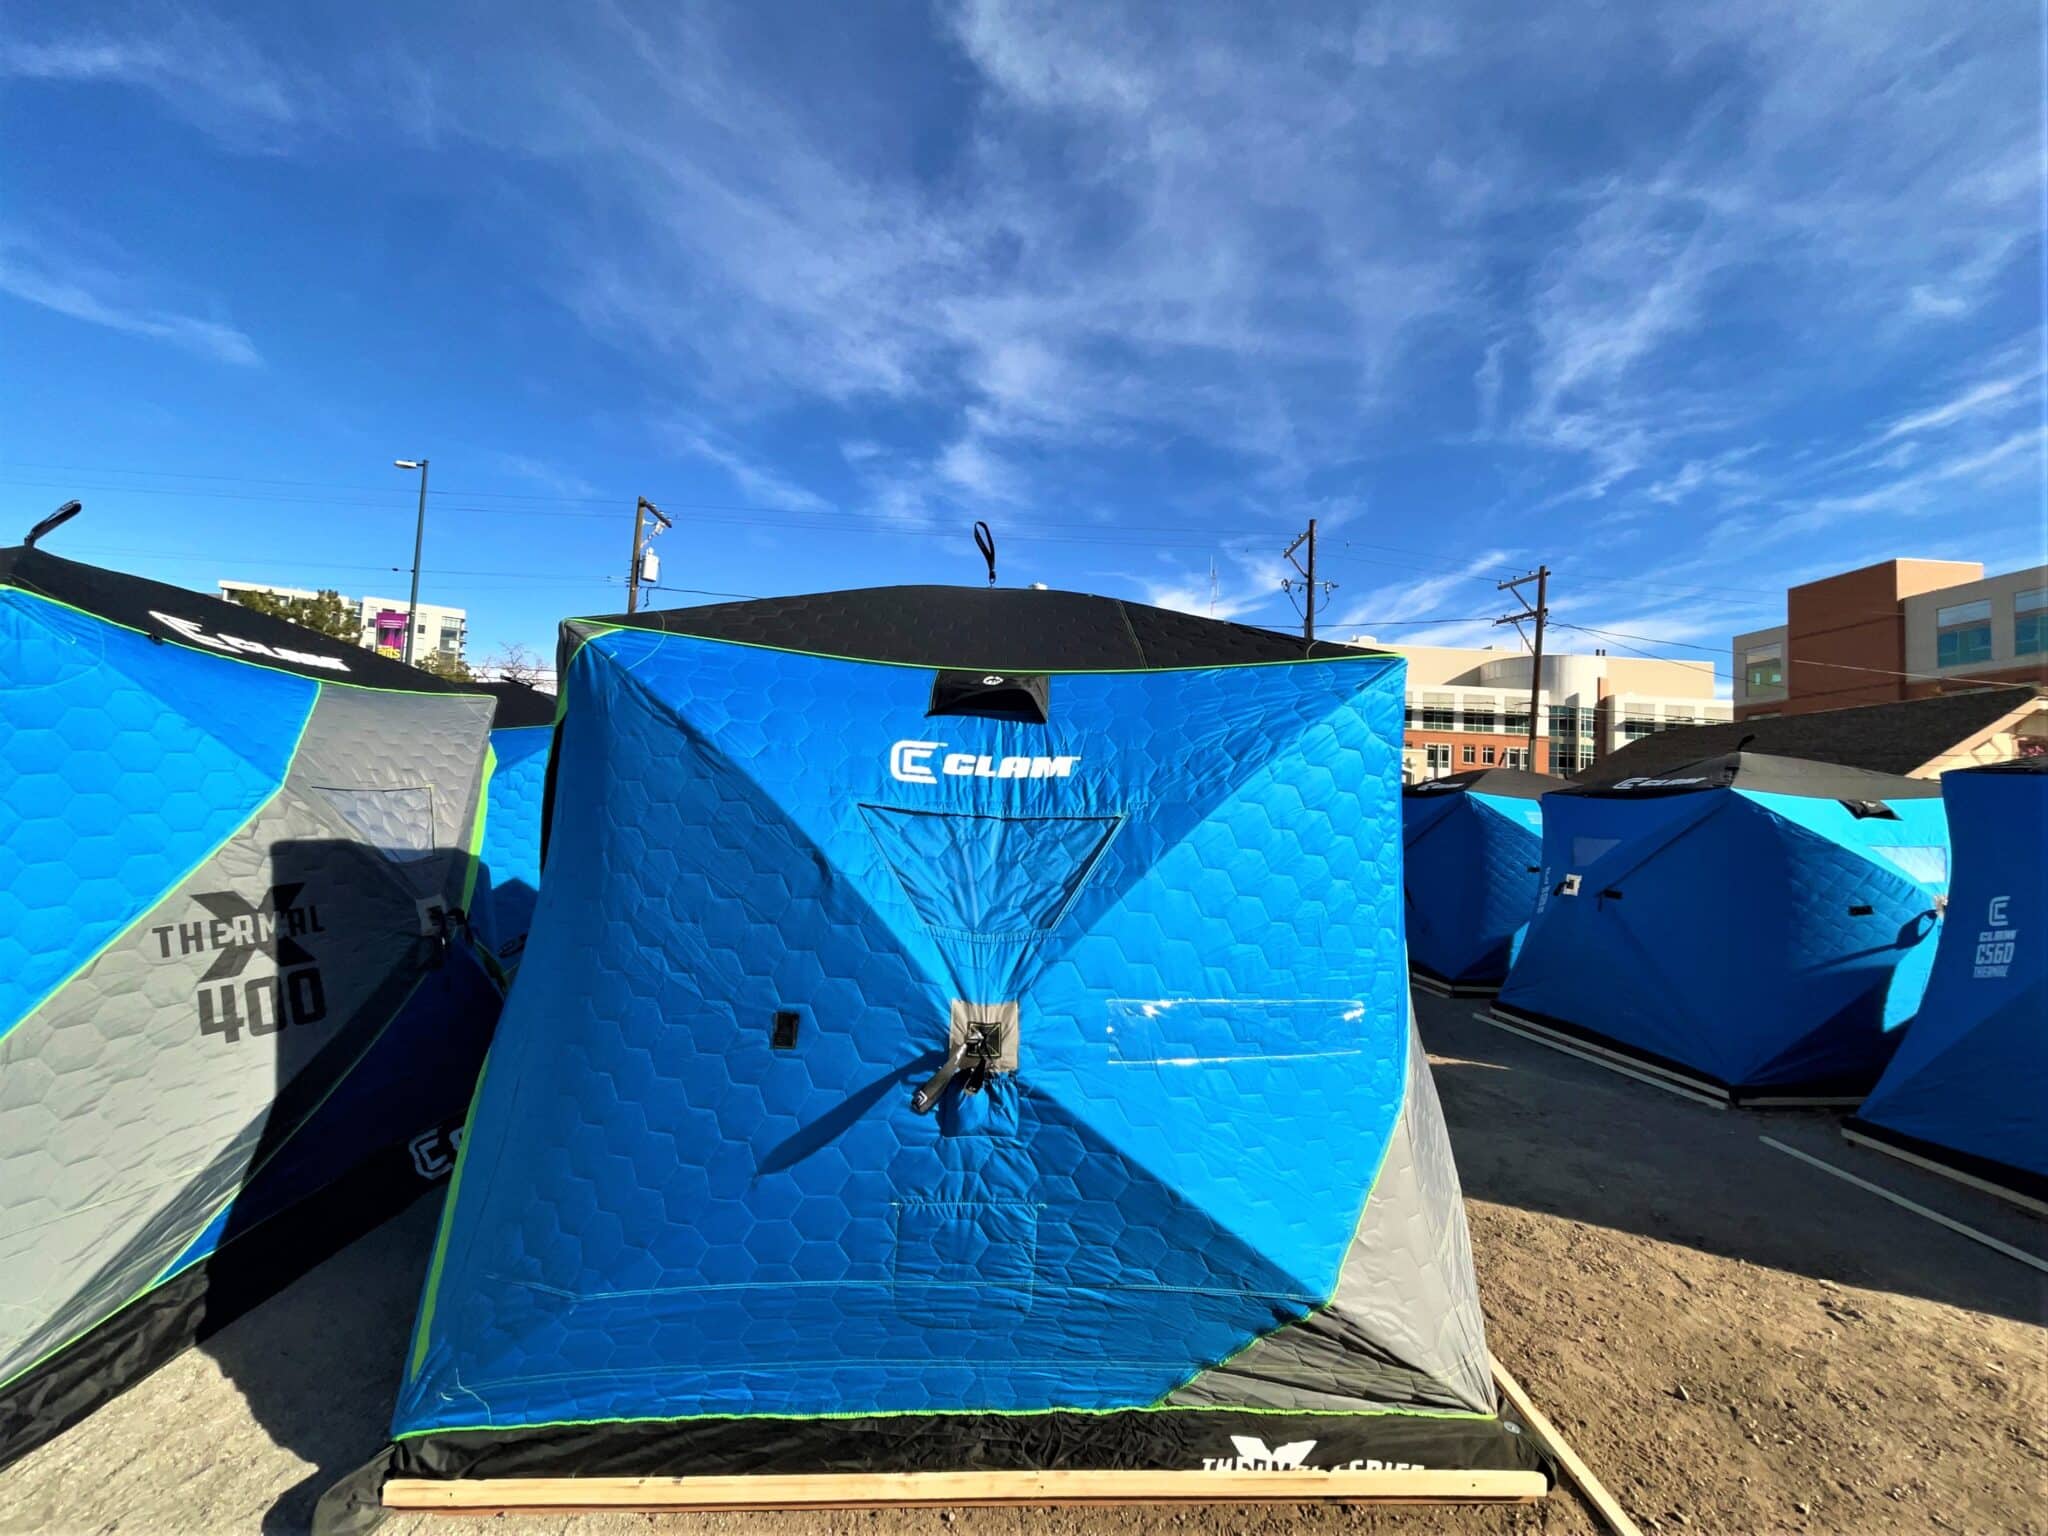 Lincoln Park neighbors lose appeal with Denver over homeless camp